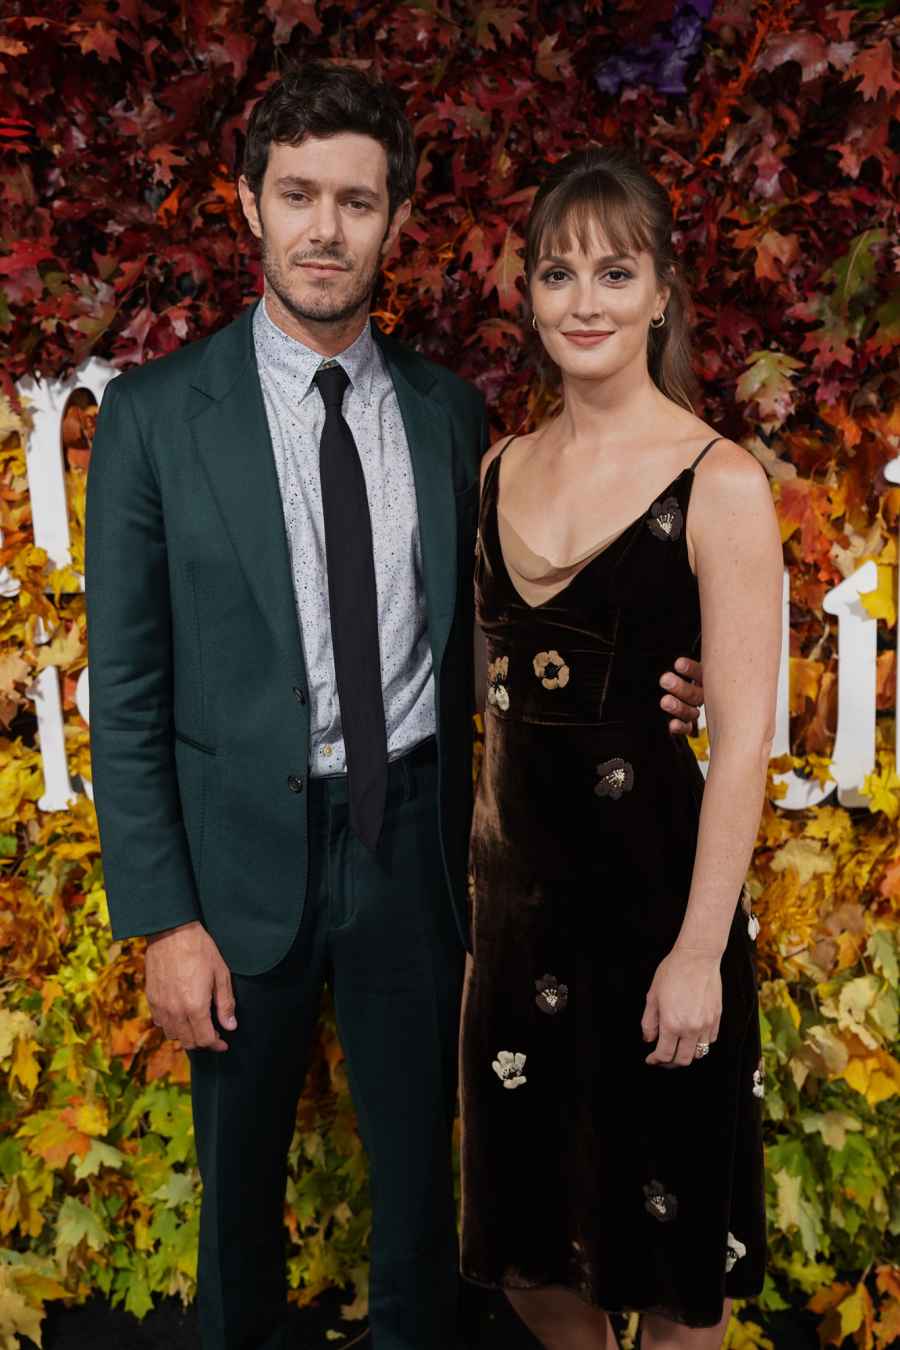 Adam Brody and Leighton Meester Make Rare Red Carpet Appearance Together at 'Fleishman Is in Trouble' Premiere